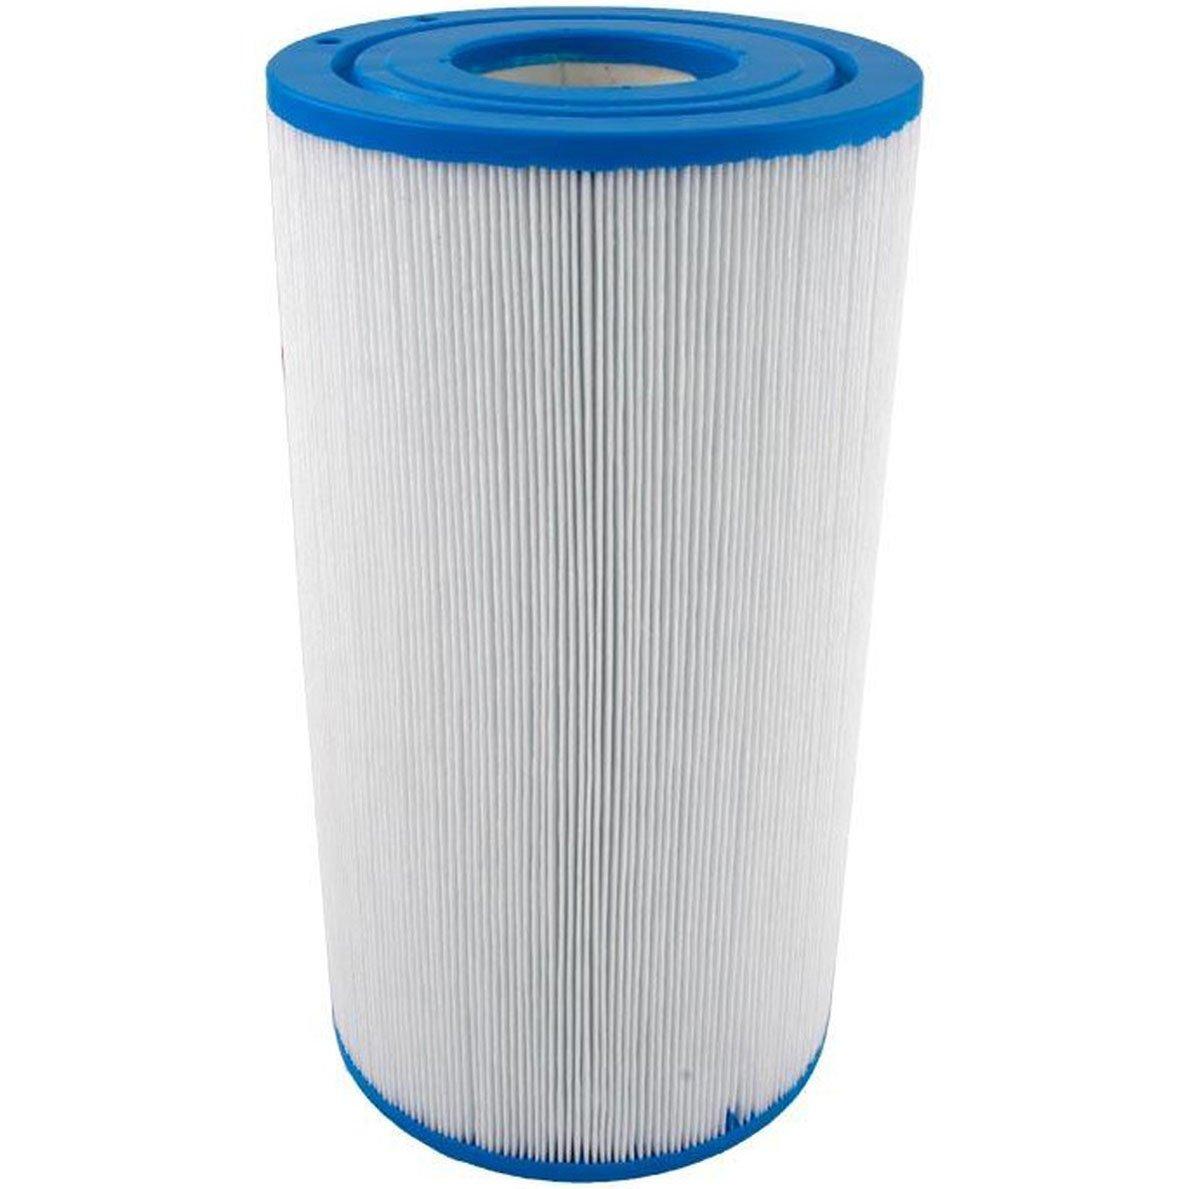 Filter Cartridge For Dynamic Series Iv, Dfm, Dfml And Waterway 35